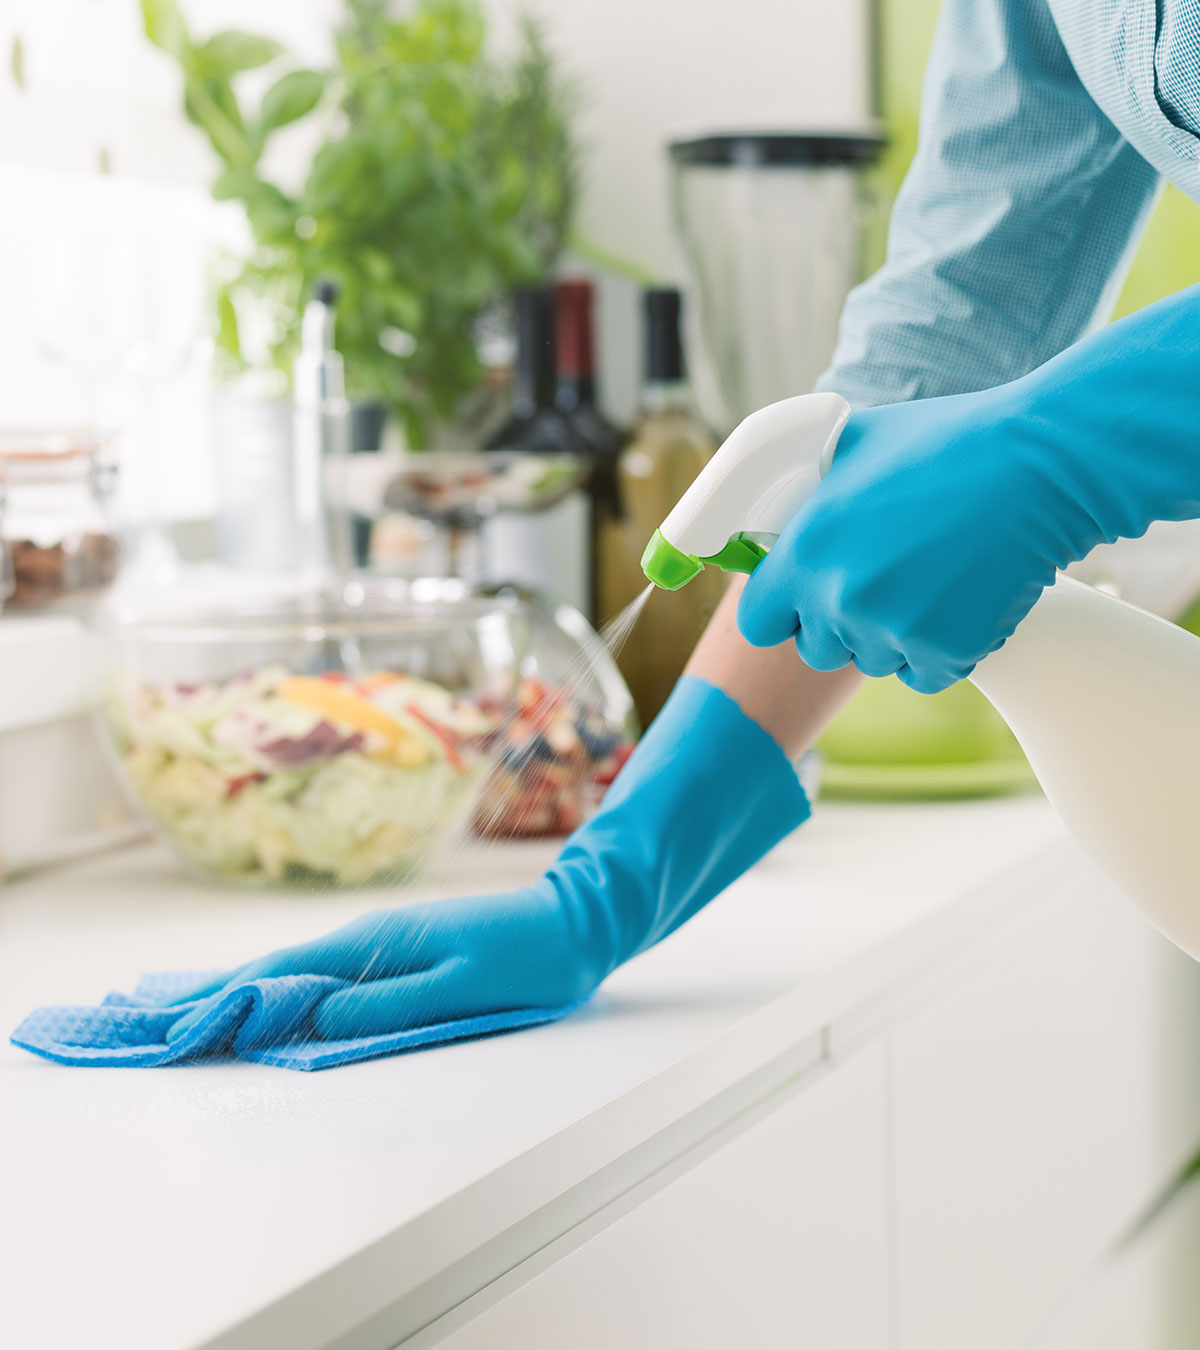 Parents Warned About Dangers Of Common Household Disinfectants